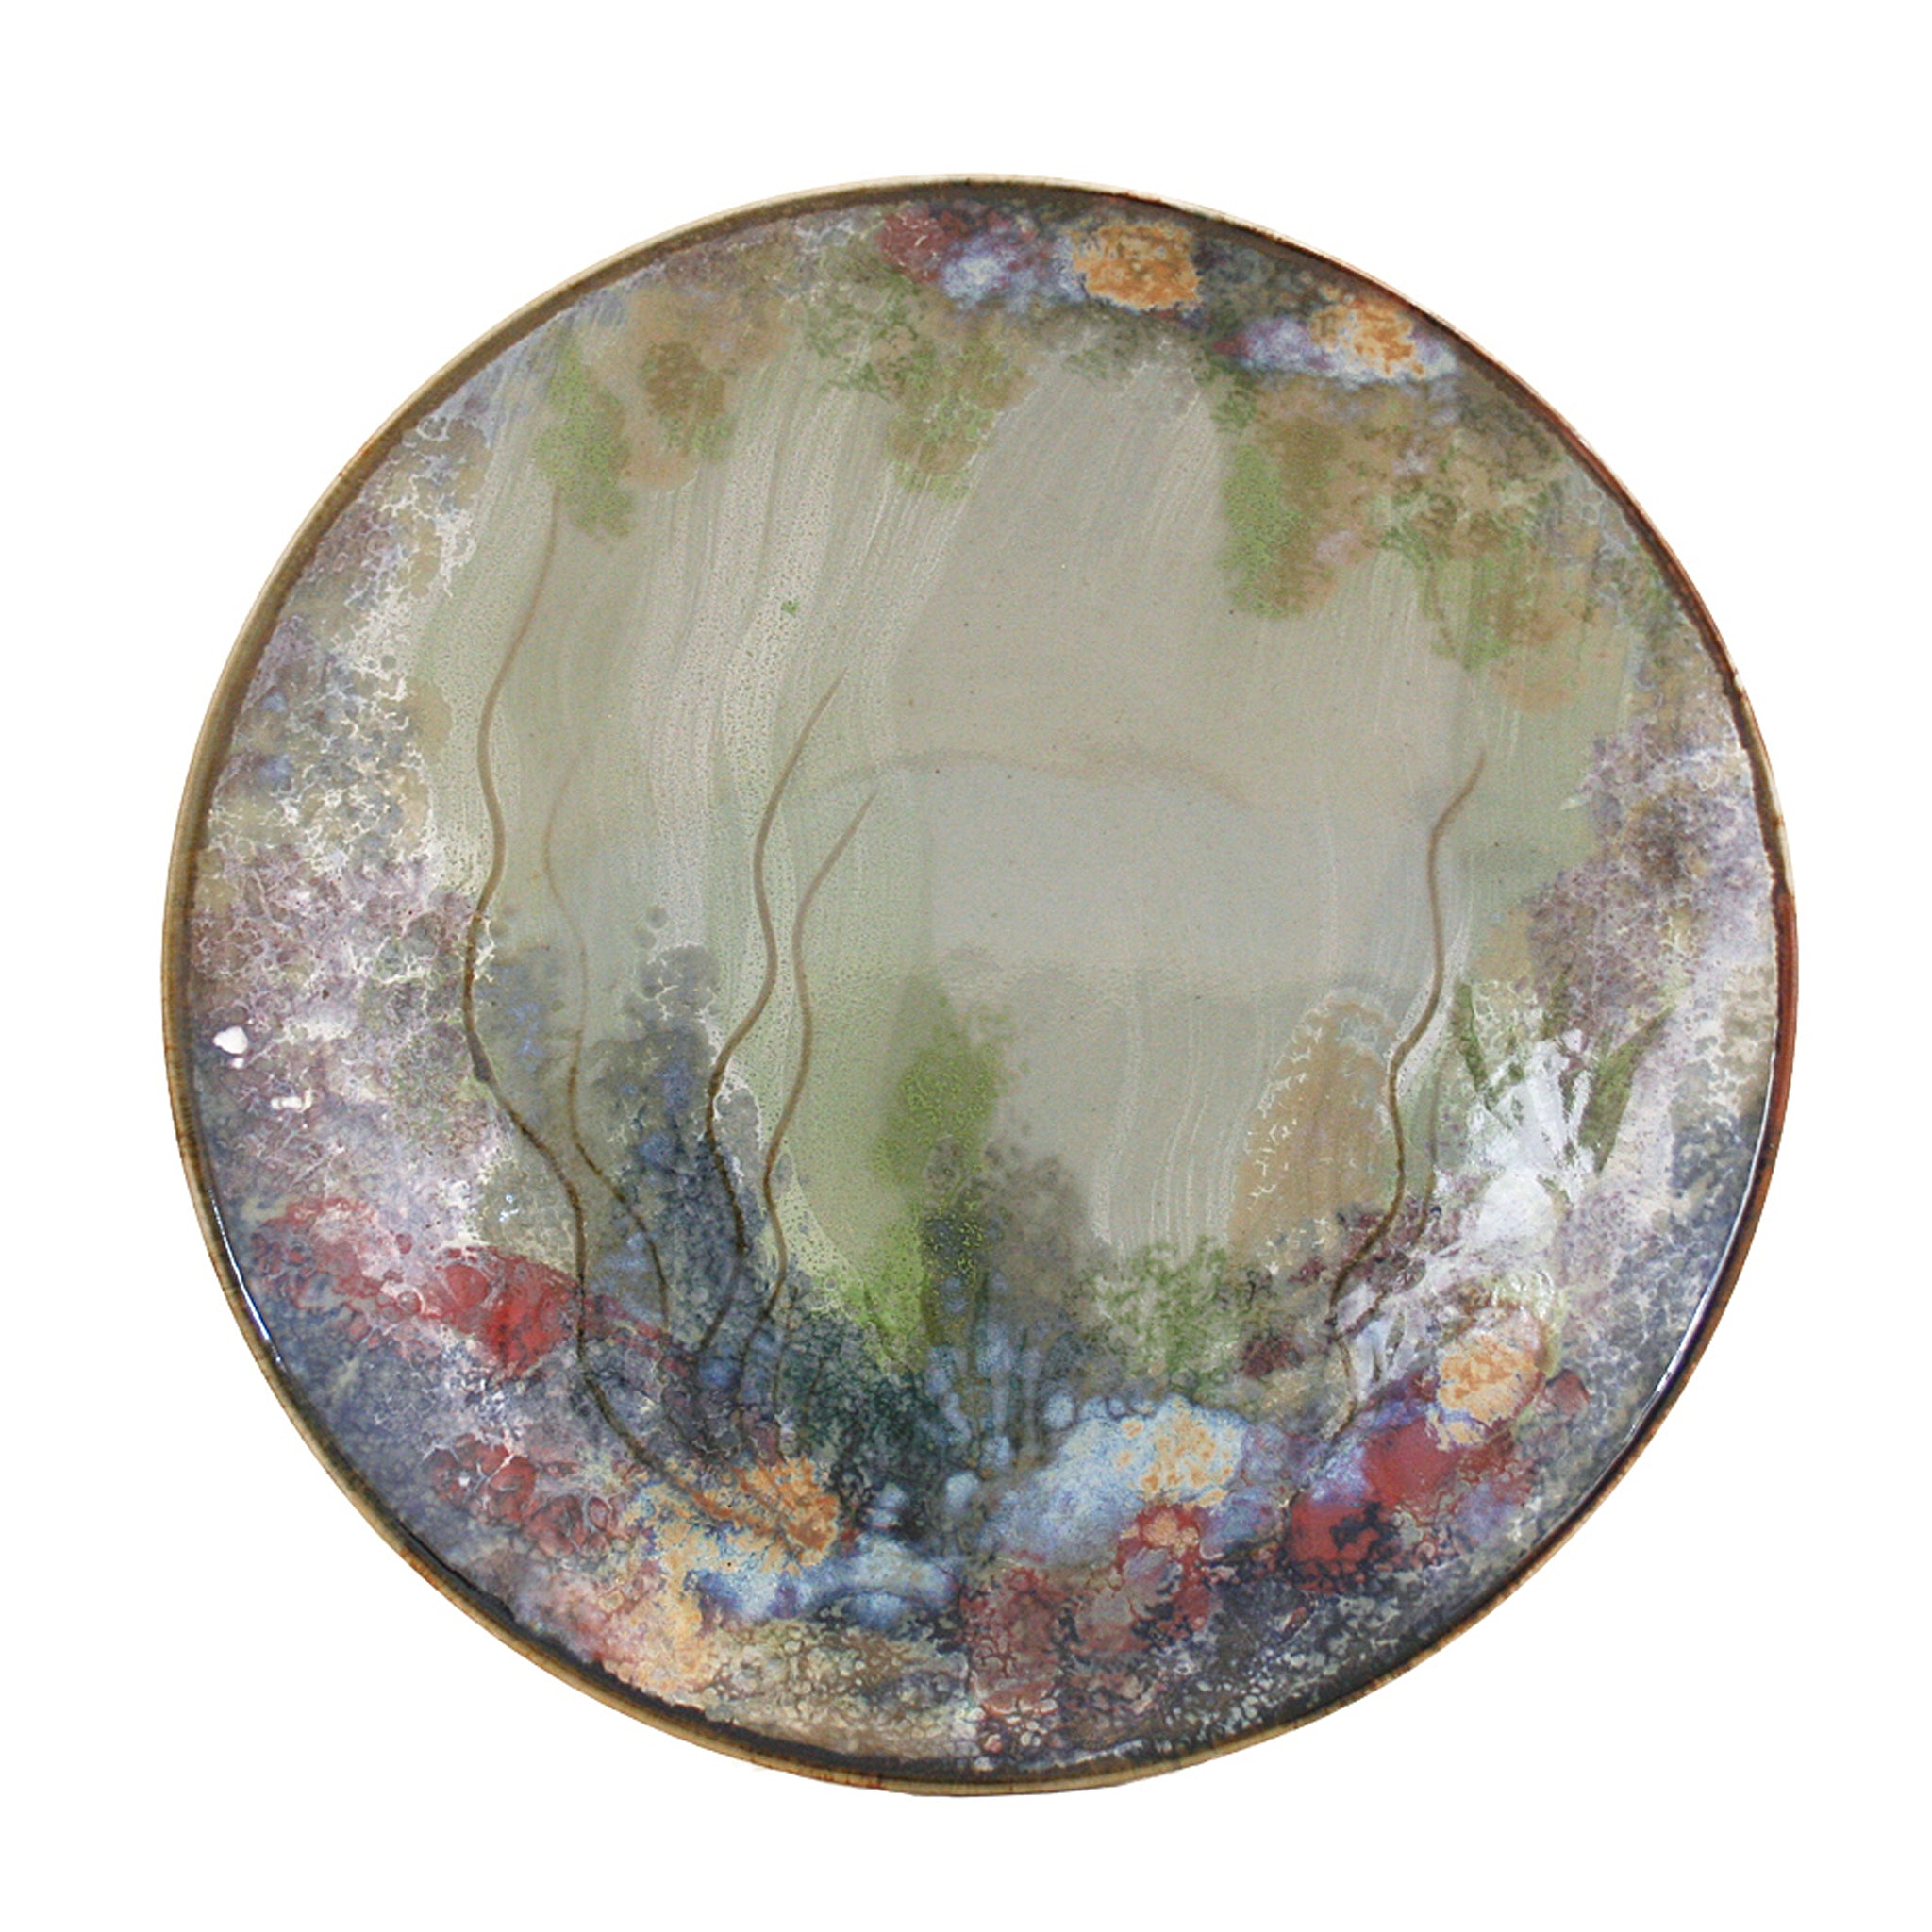 Large glazed stoneware dish, featuring hand painted design of a rock pool bottom